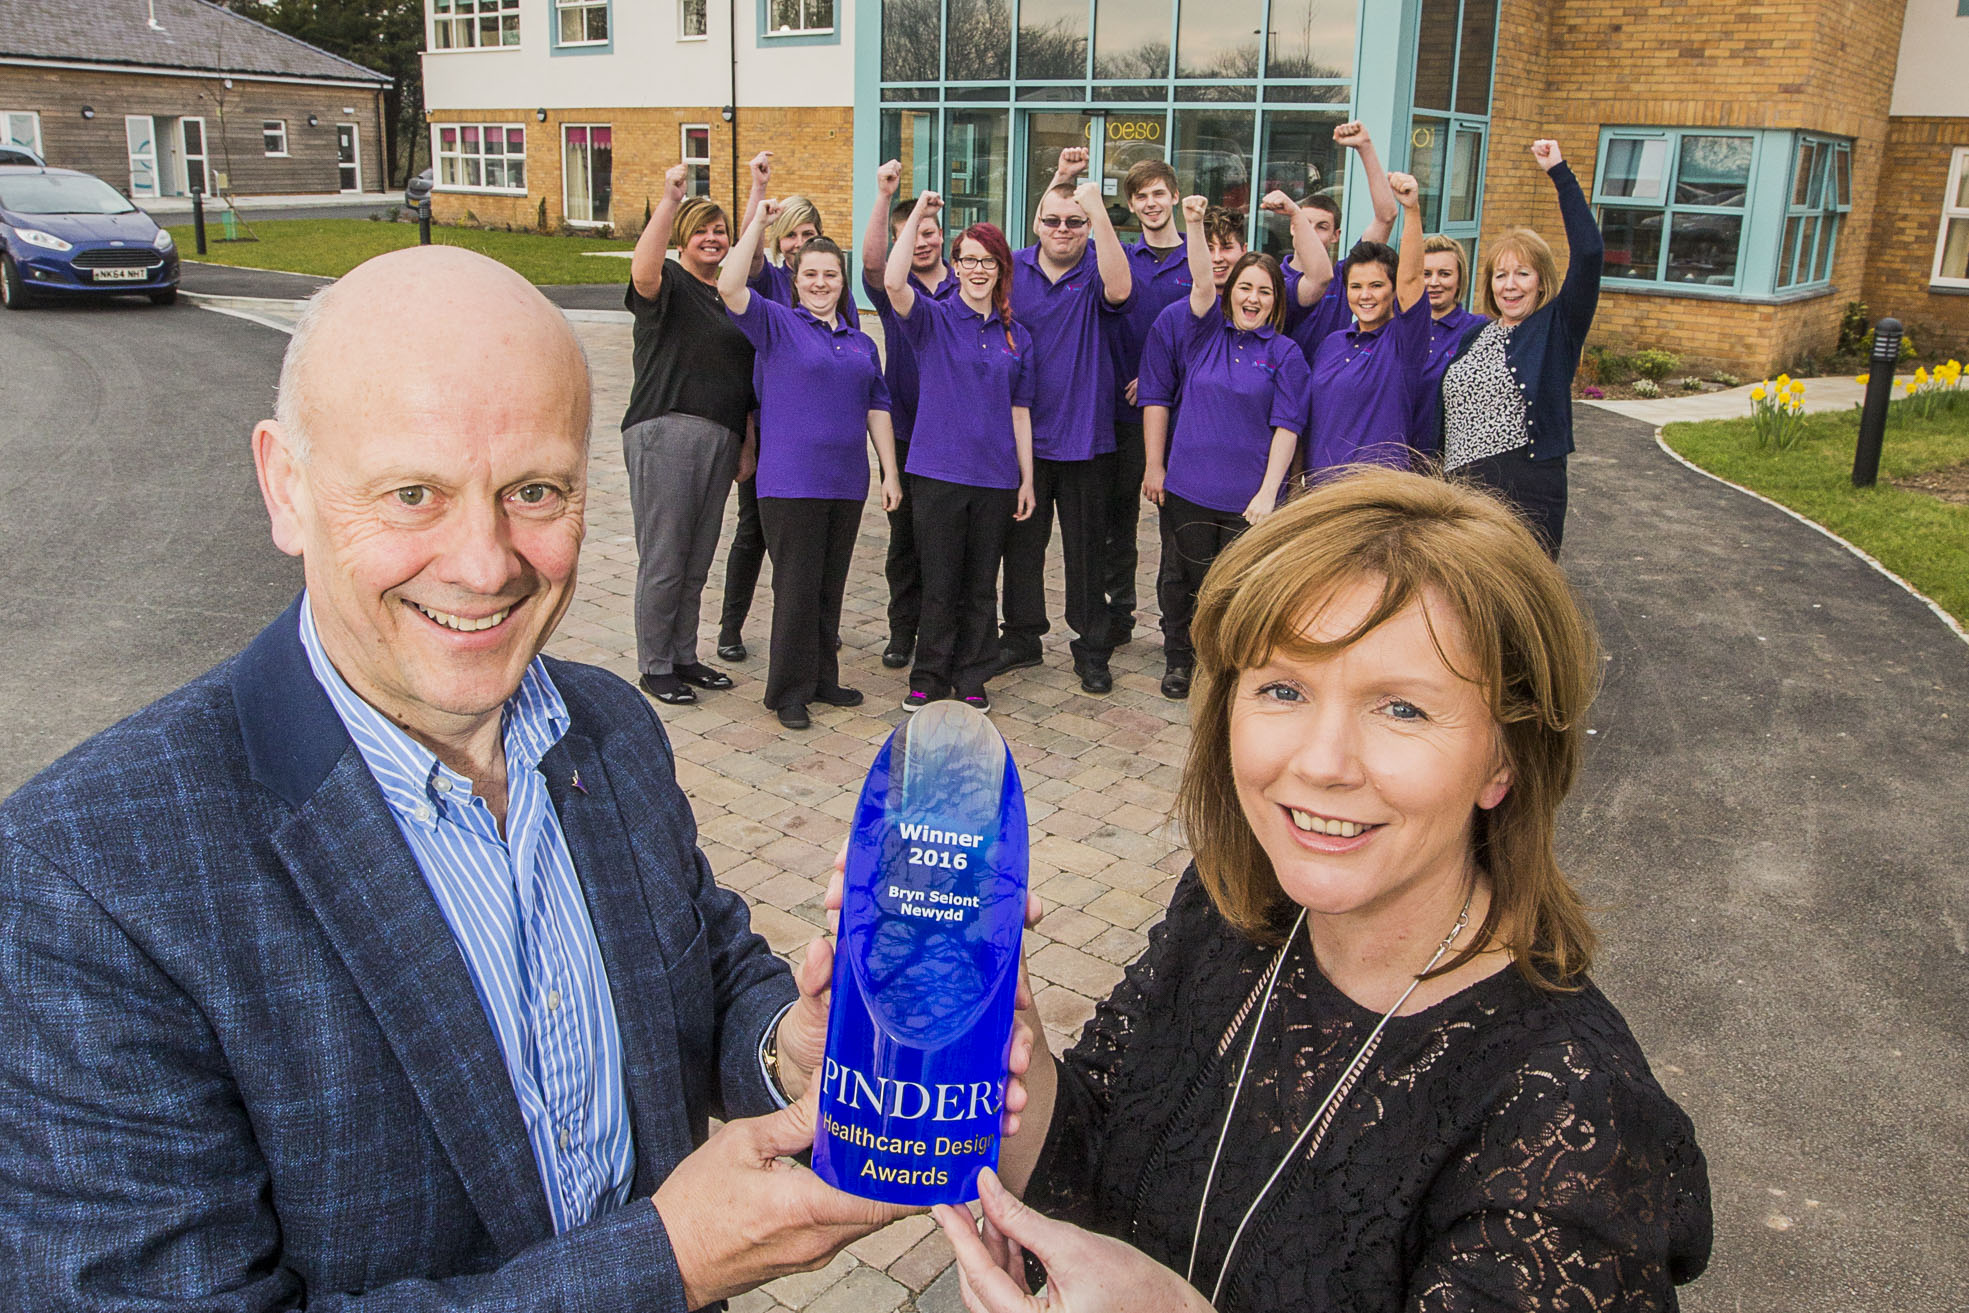 Bryn Seiont Newydd crowned as best new care home in UK